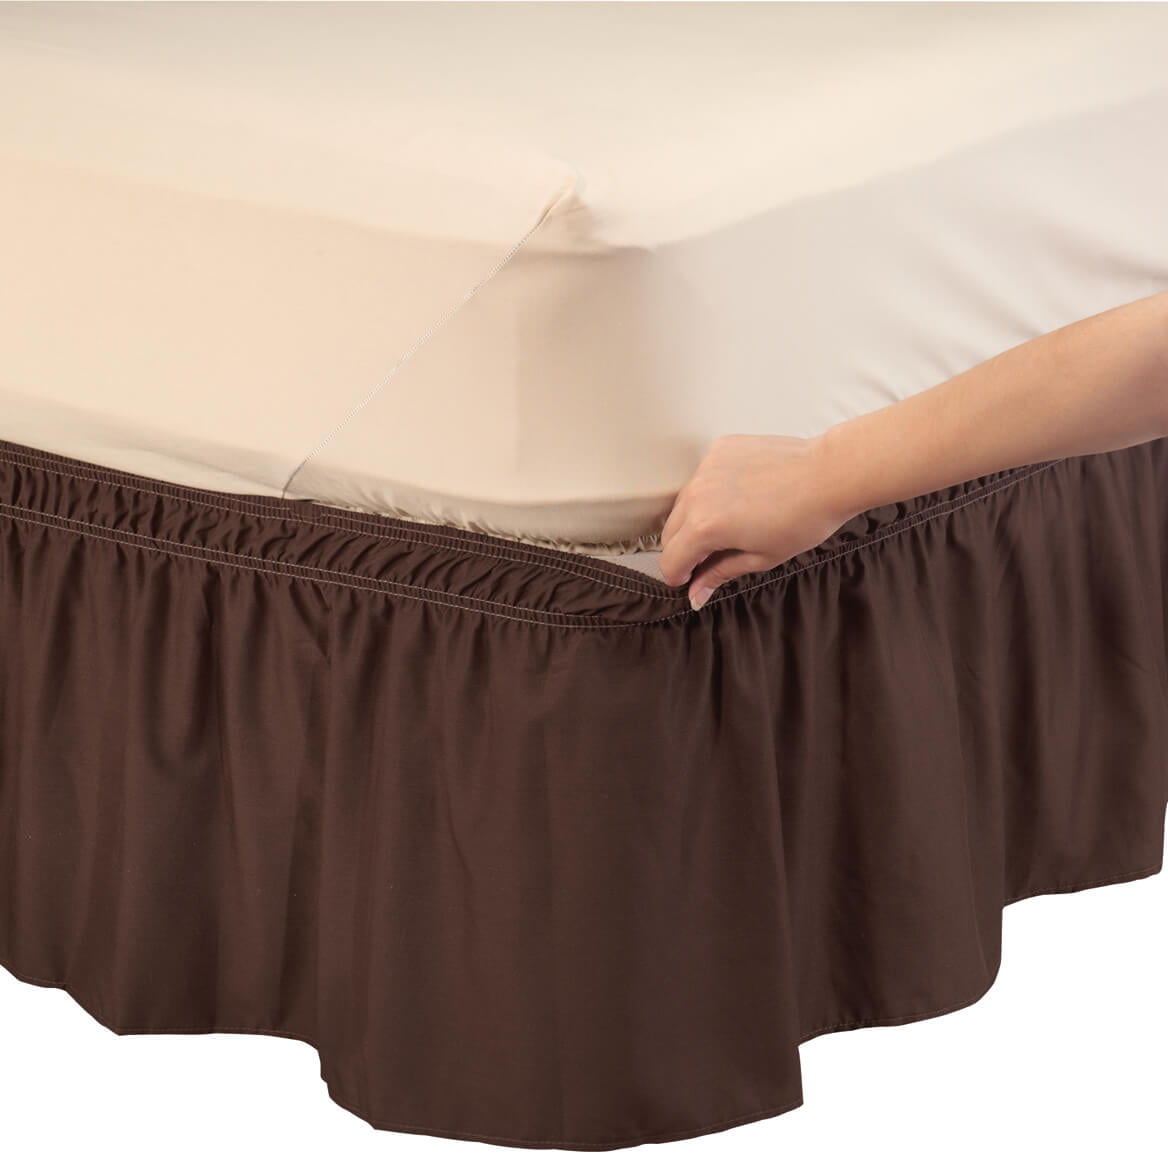 Super Nice Smooth Twin Full Size Around Bed 14" Elastic Wrap Ruffle Bed Skirt 